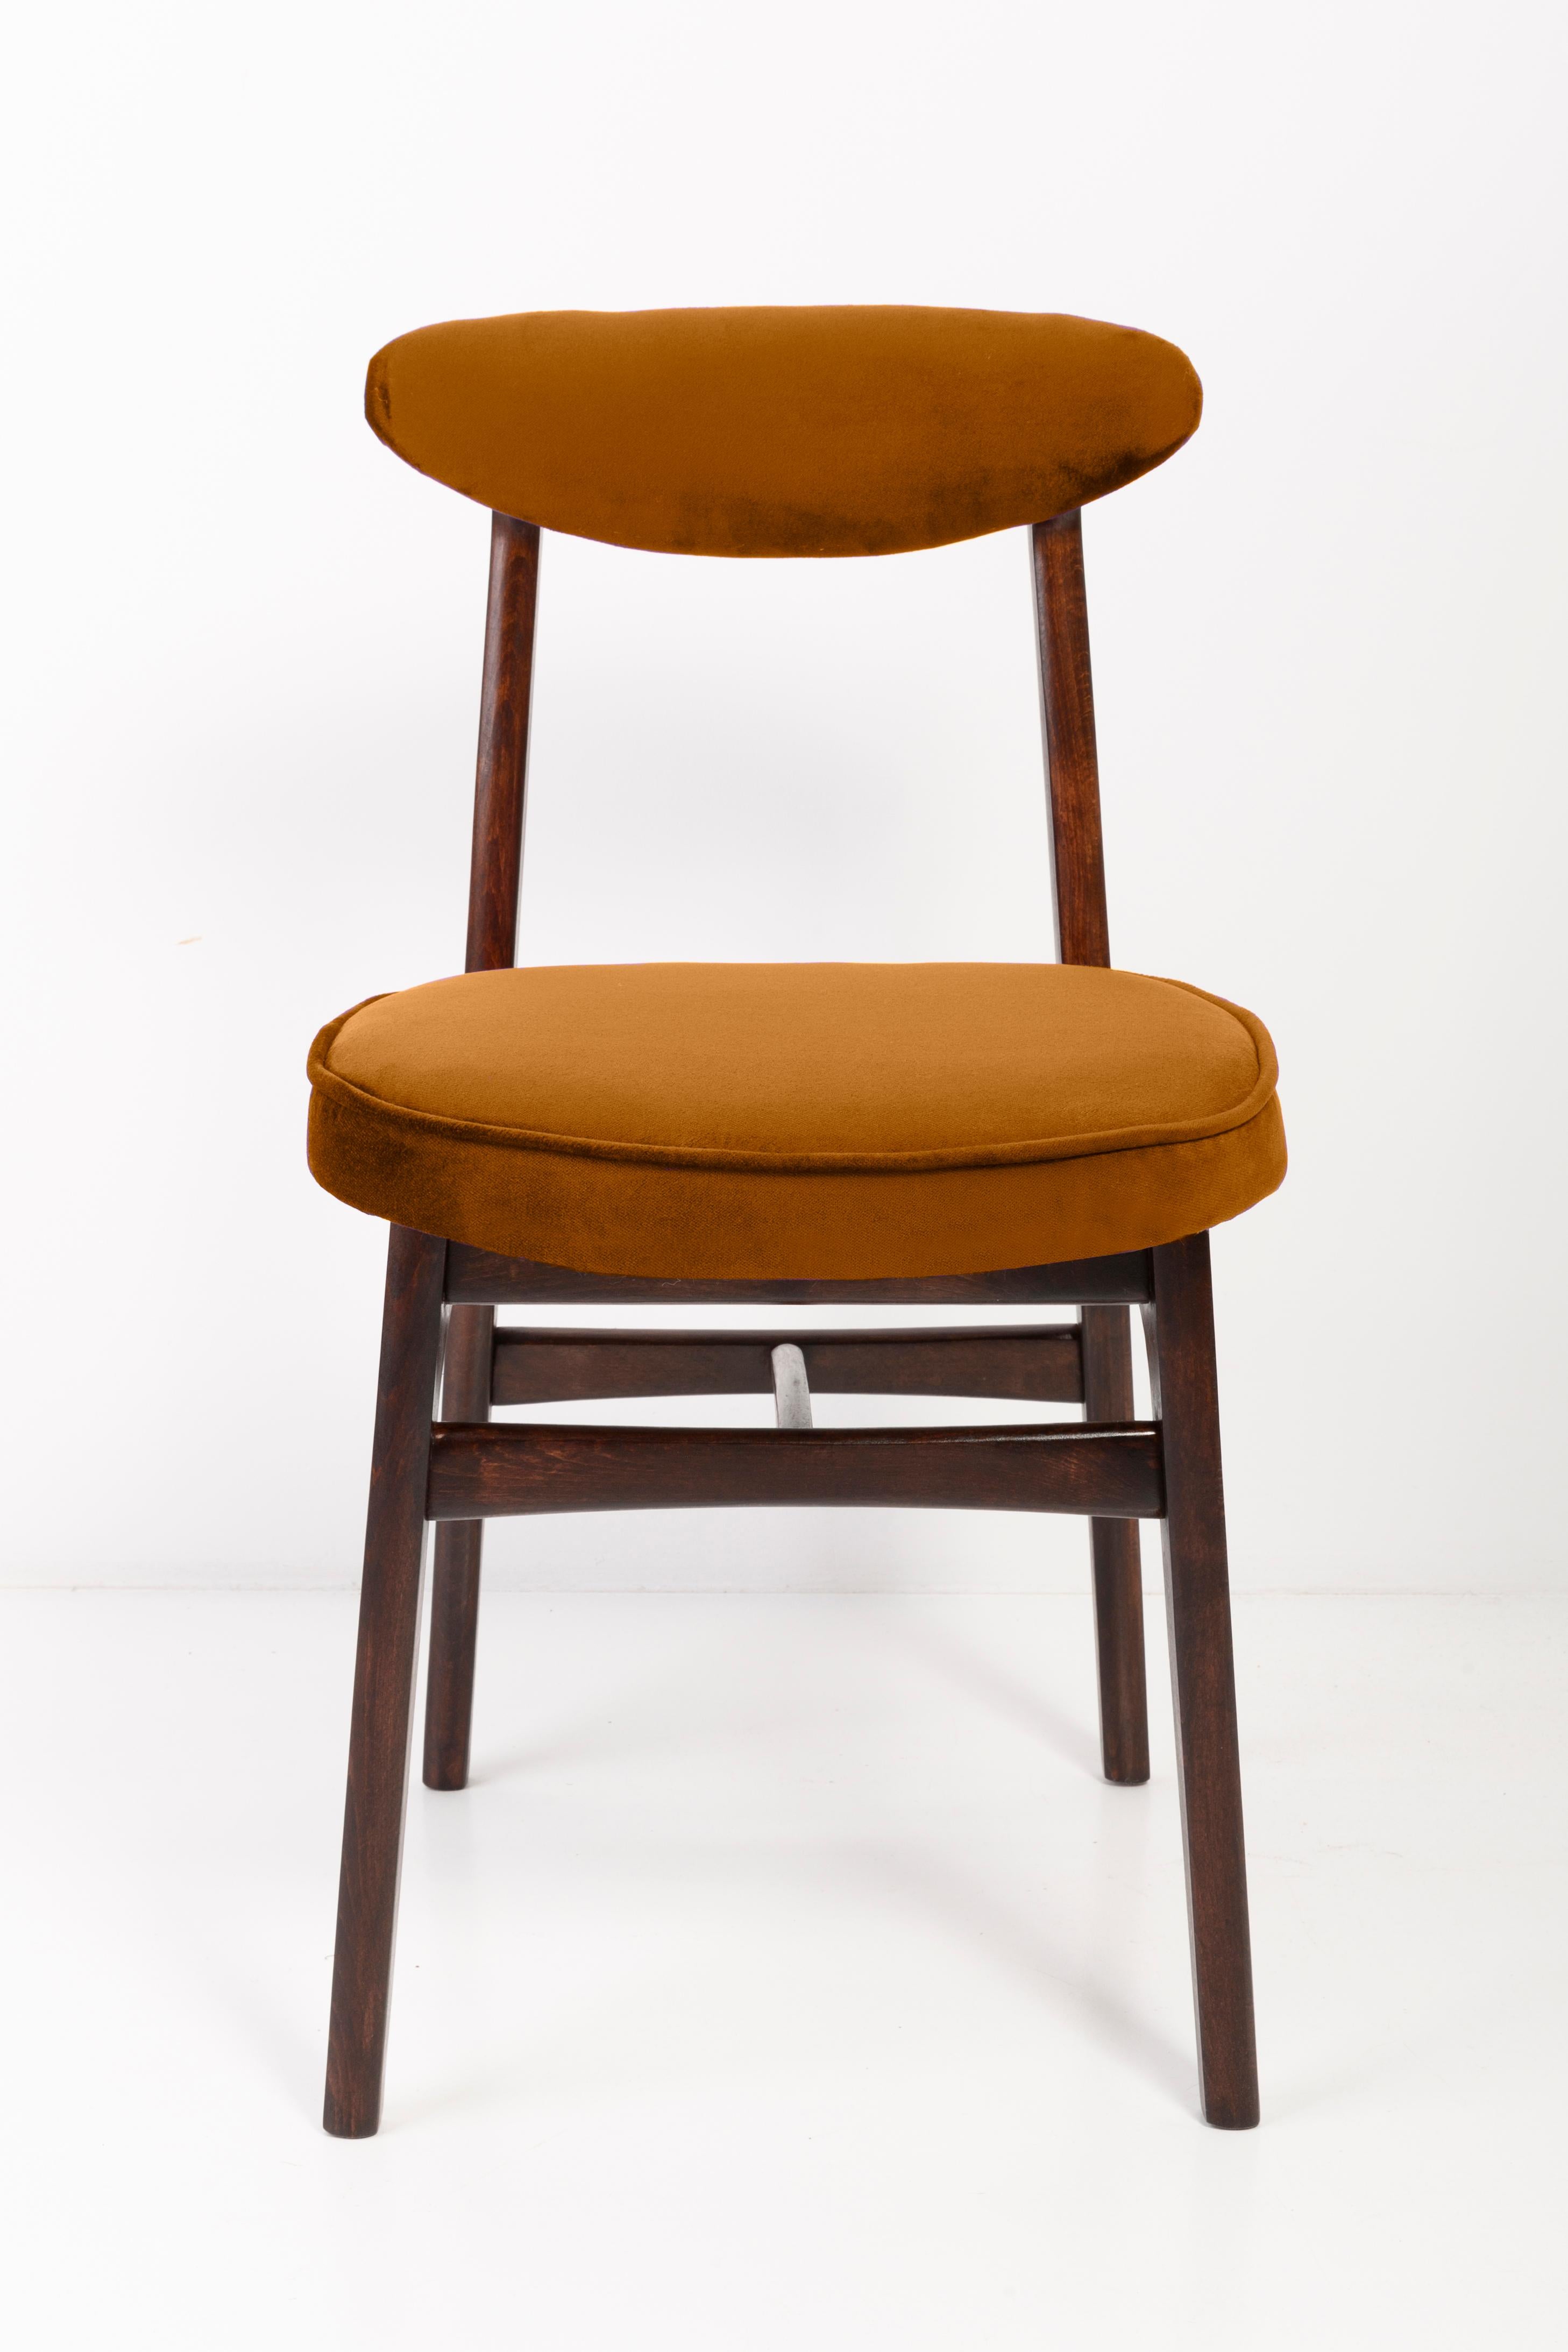 Hand-Crafted Mid-Century Copper Velvet Chair Designed by Rajmund Halas, Europe, 1960s For Sale